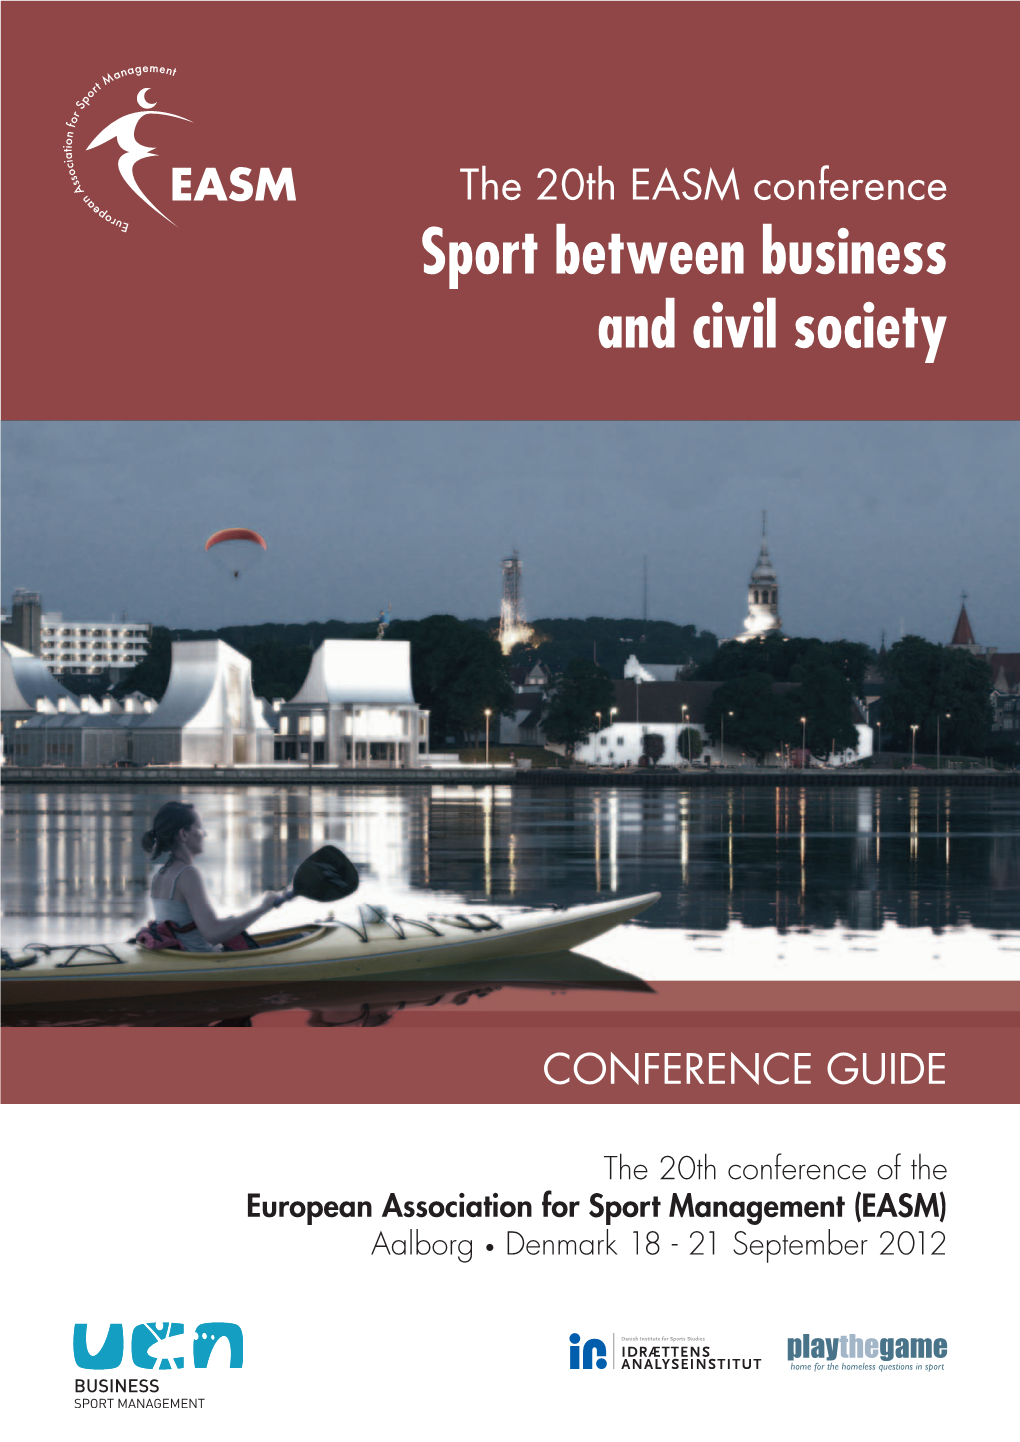 At EASM 2012 EDUCATION, Management Education Programmes at Professional Sports Clubs and the Growing the University College of Northern Den- Commercial Fitness Sector